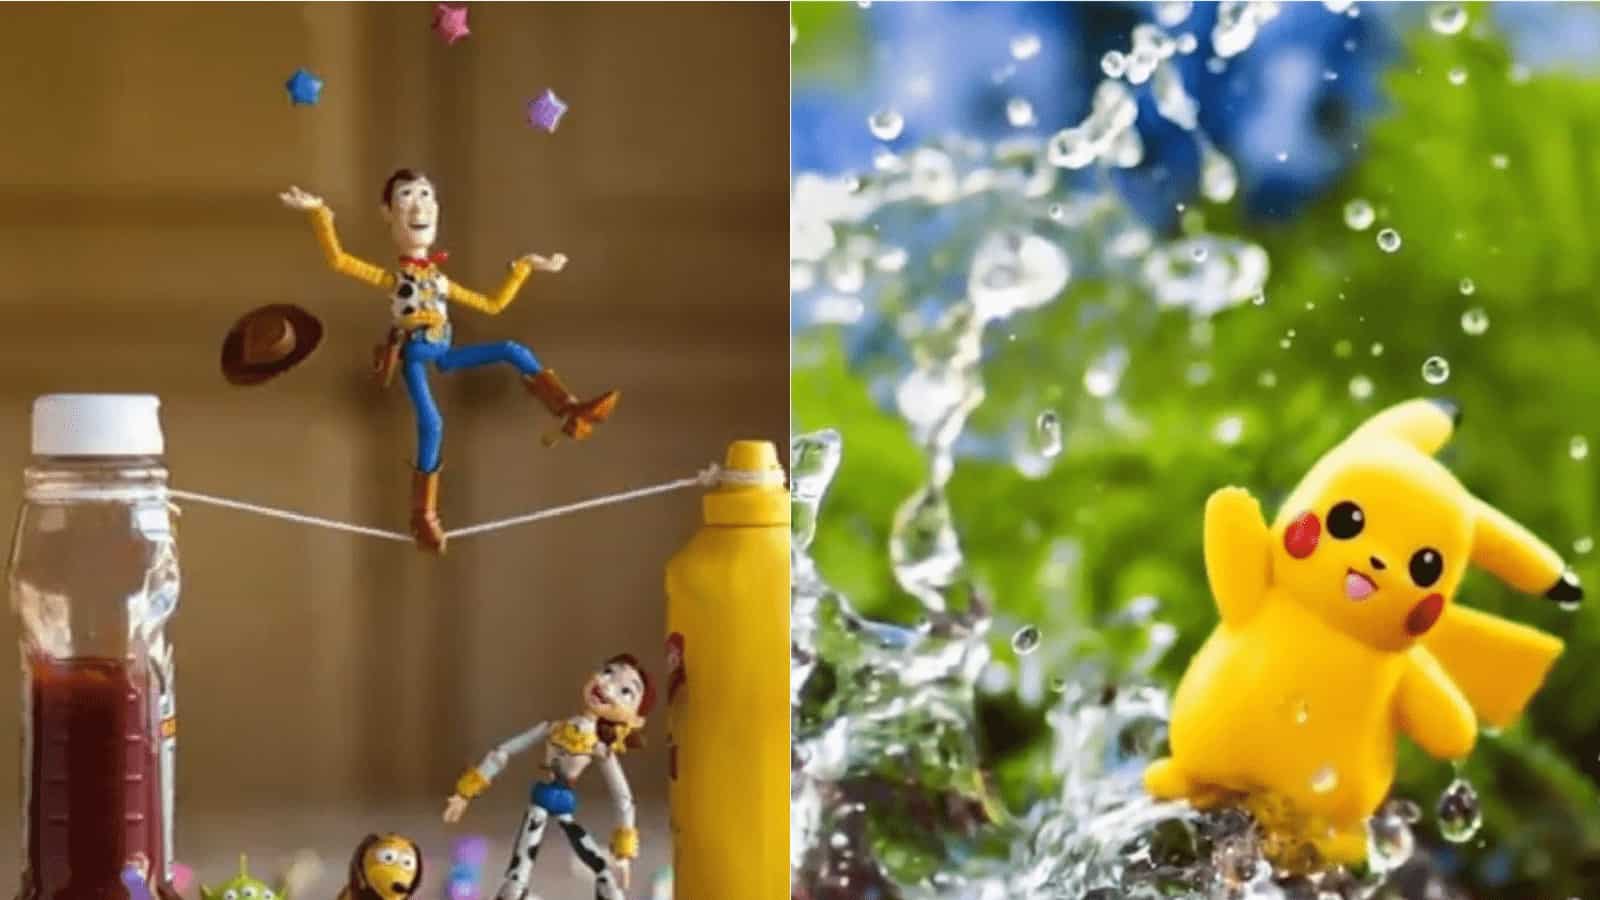 Photographer Tells Interesting Stories Through Toy Photography 